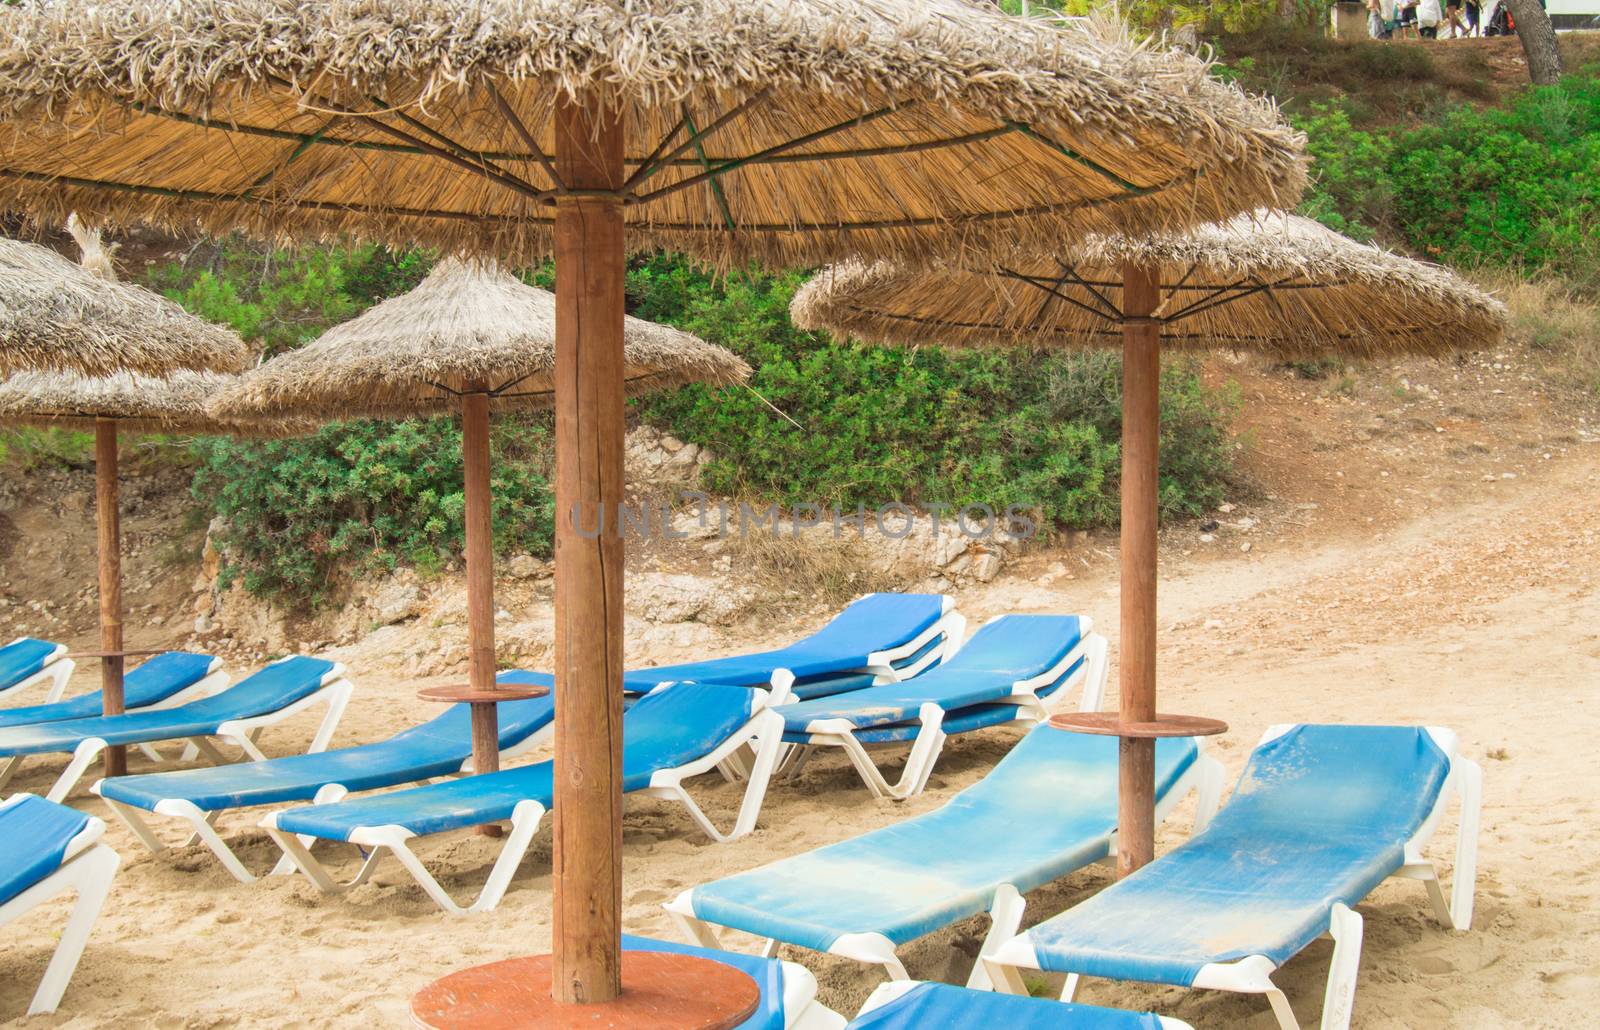 Chaise Lounges and straw umbrellas on the beautiful sandy beach of Palma de Mallorca by claire_lucia